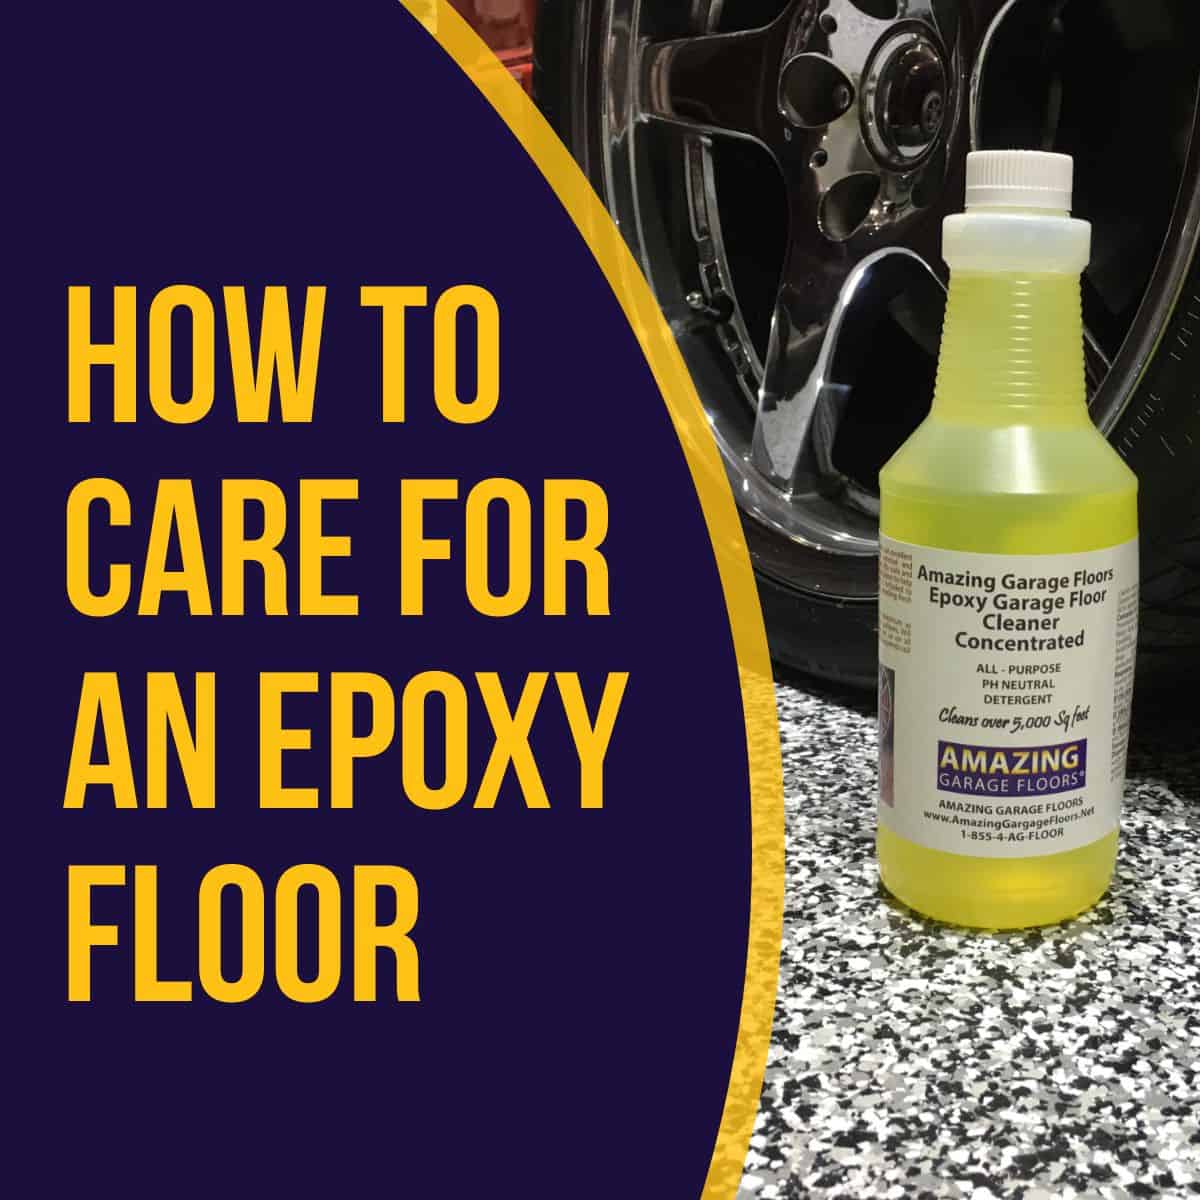 How To Care For An Epoxy Floor - Amazing Garage Floors